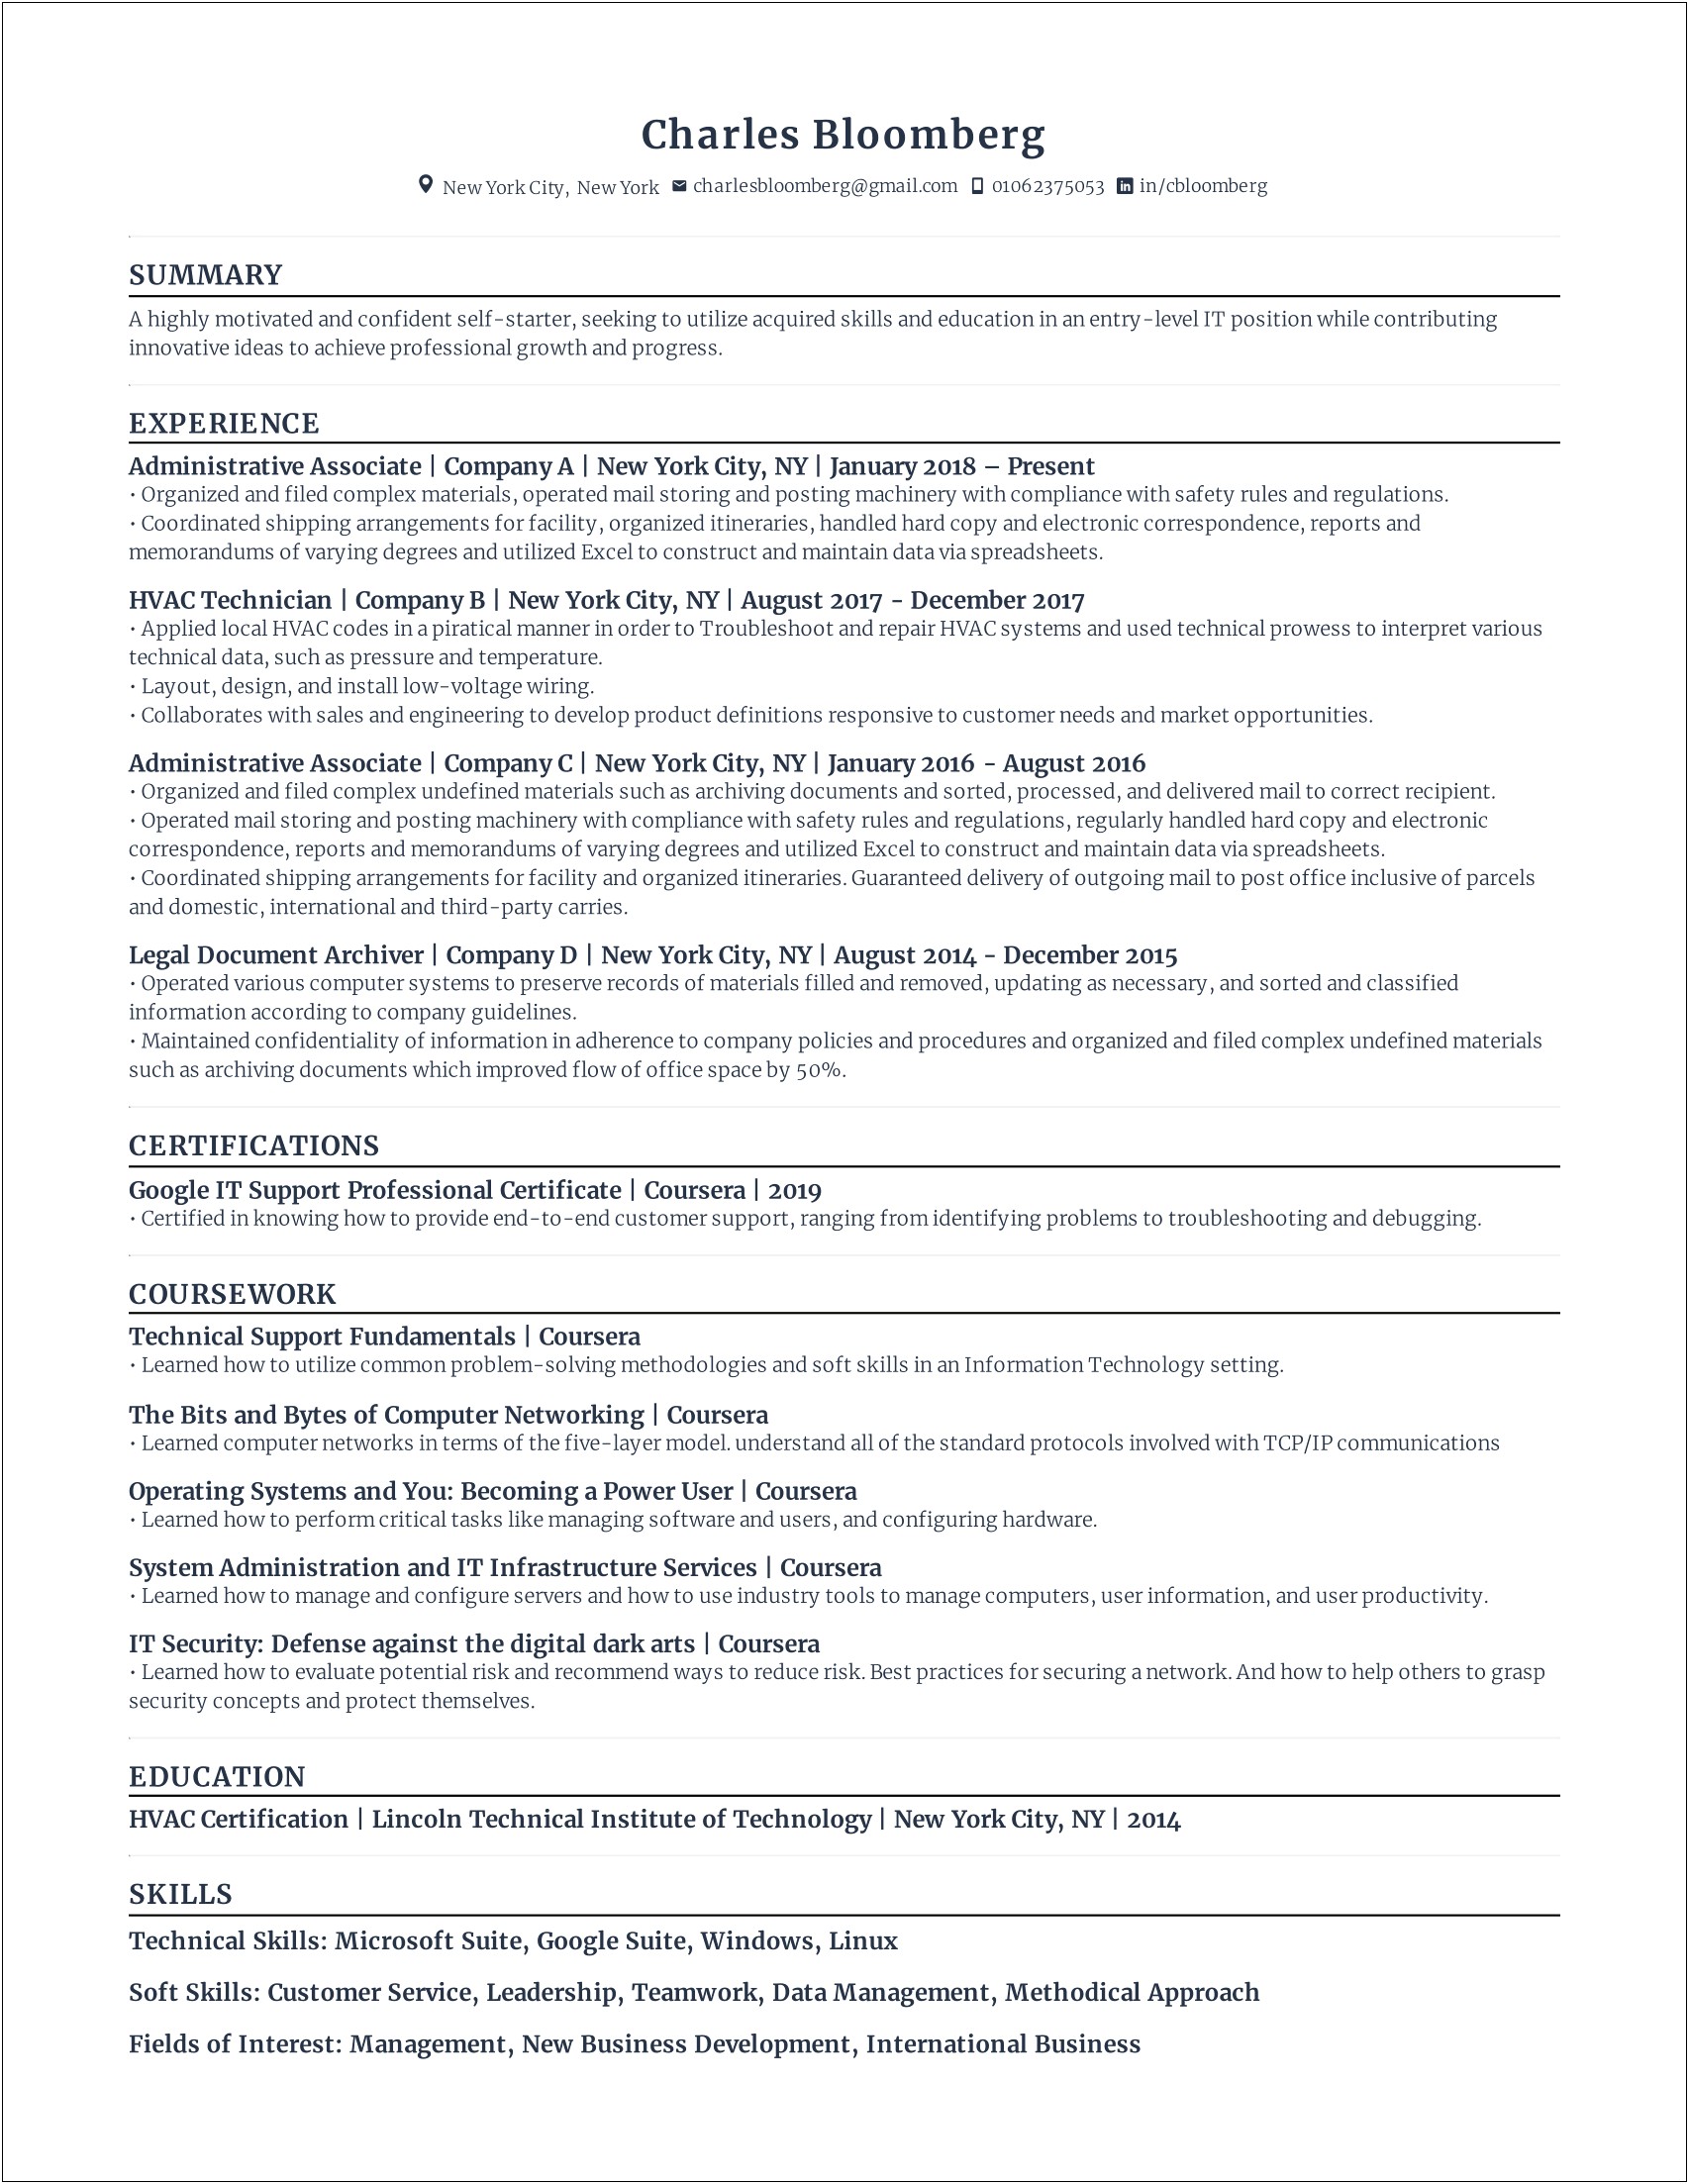 Resume Sample For Low Voltage It Technician